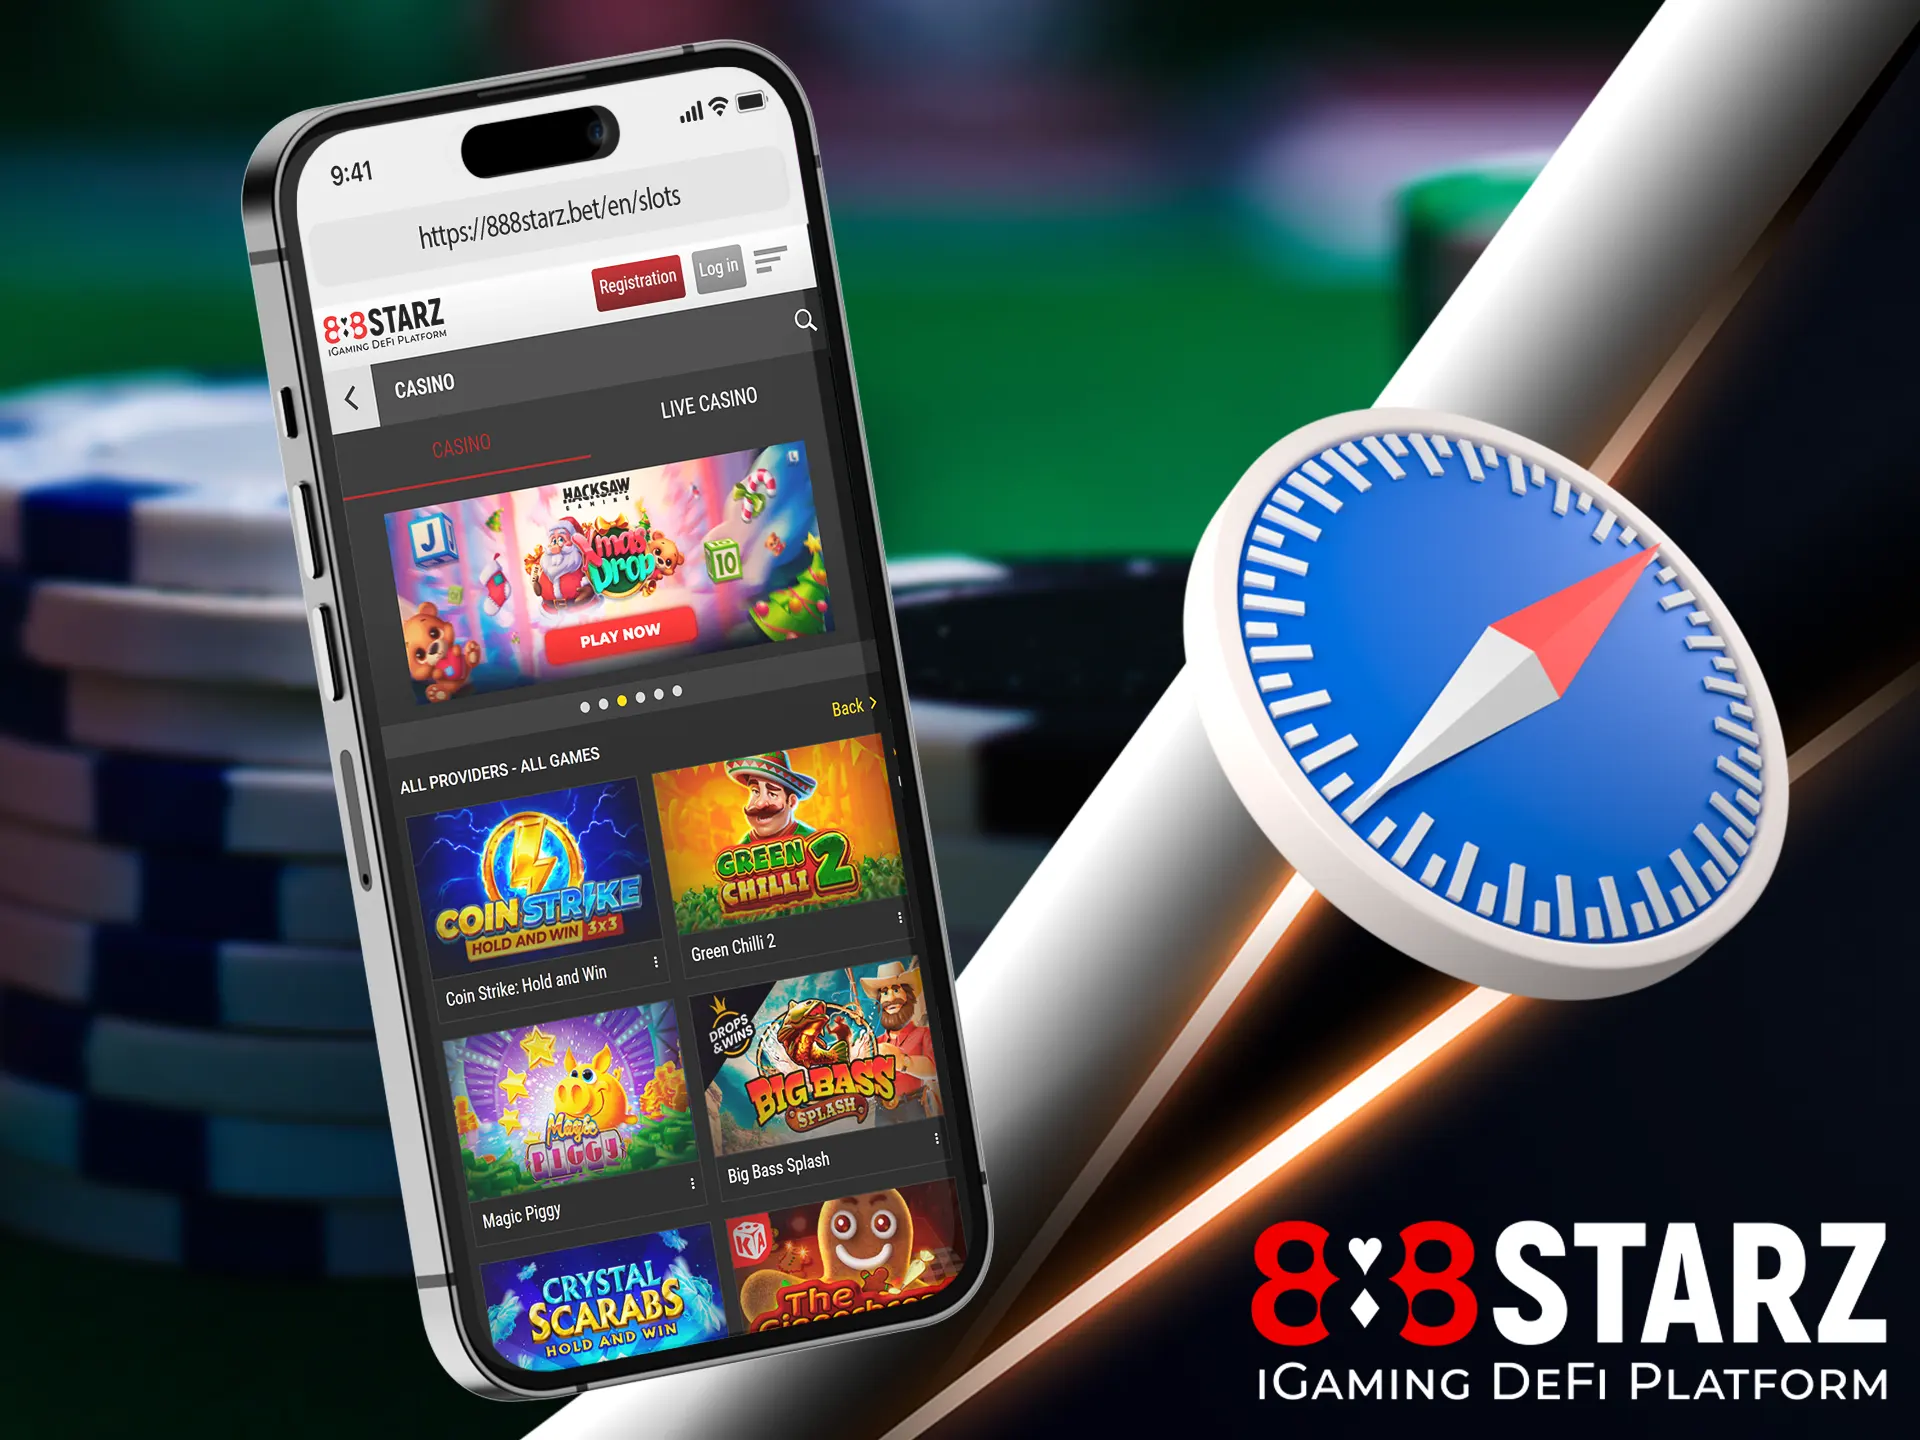 If your smartphone is not compatible with the application - this option from 888starz will help you enjoy the game.